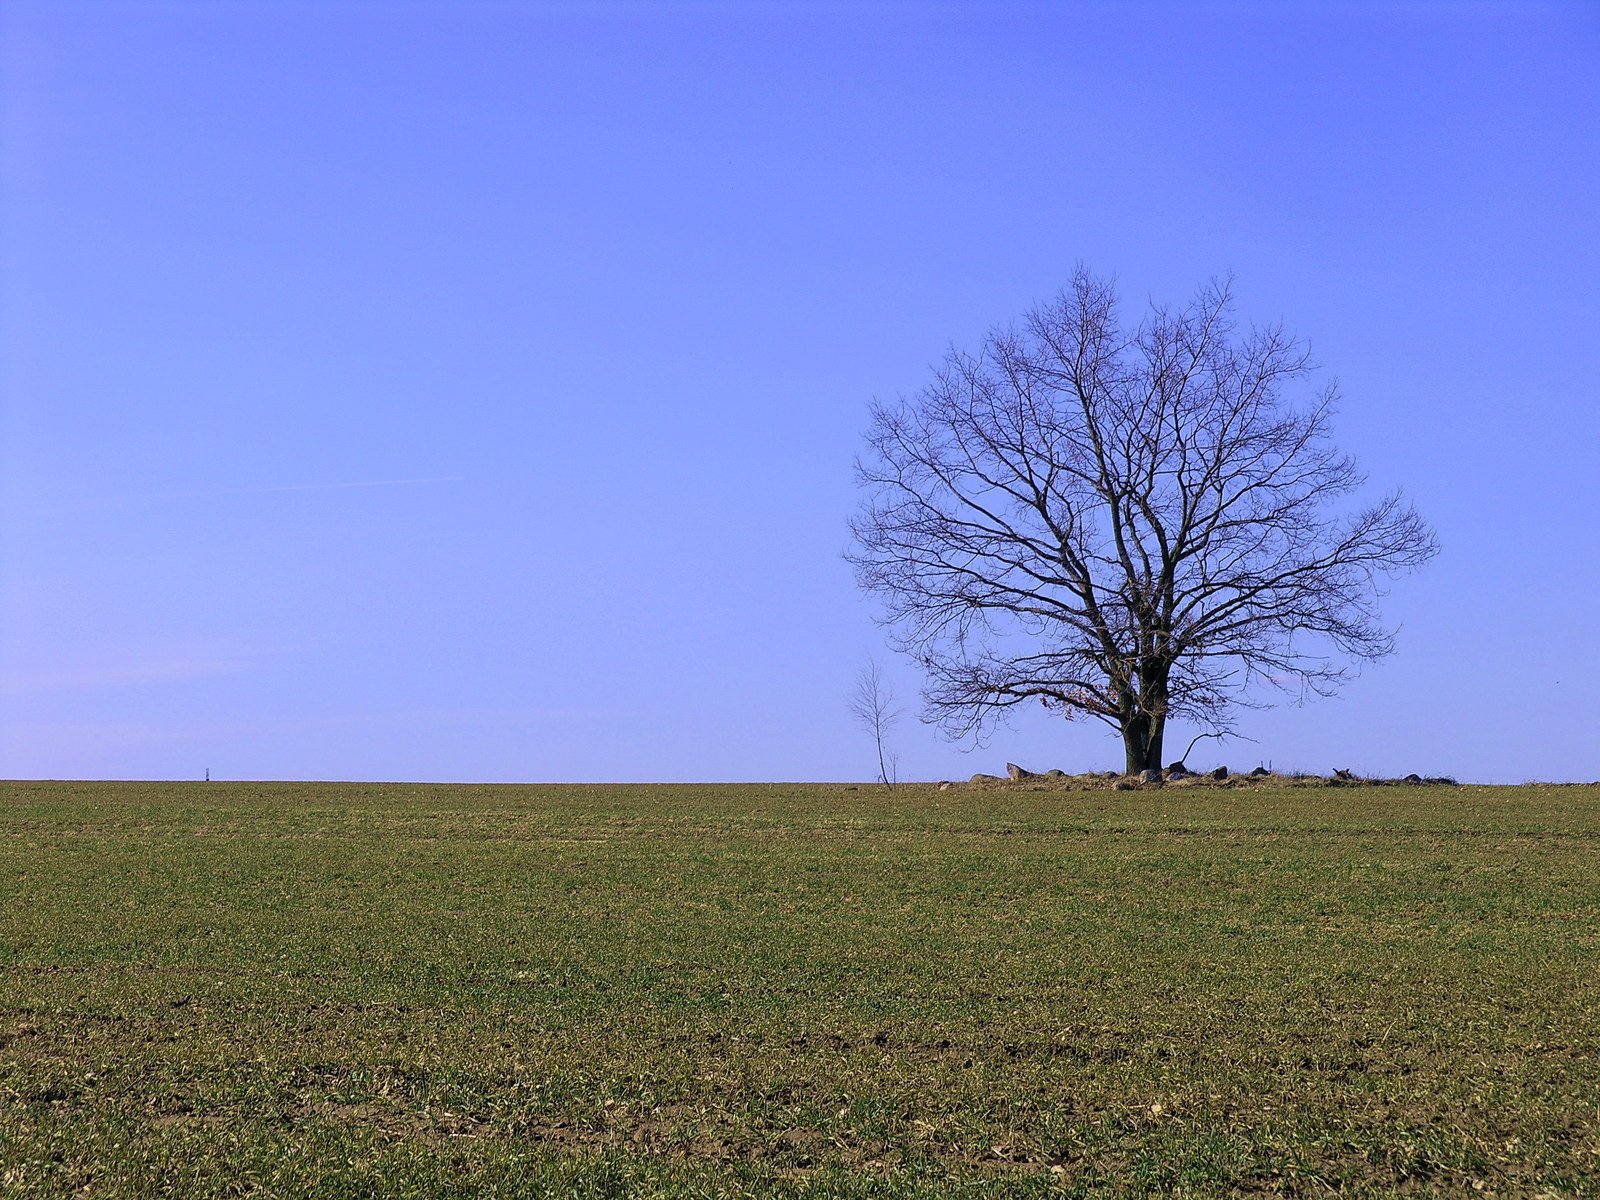 a lone tree stands alone in the middle of a grassy field